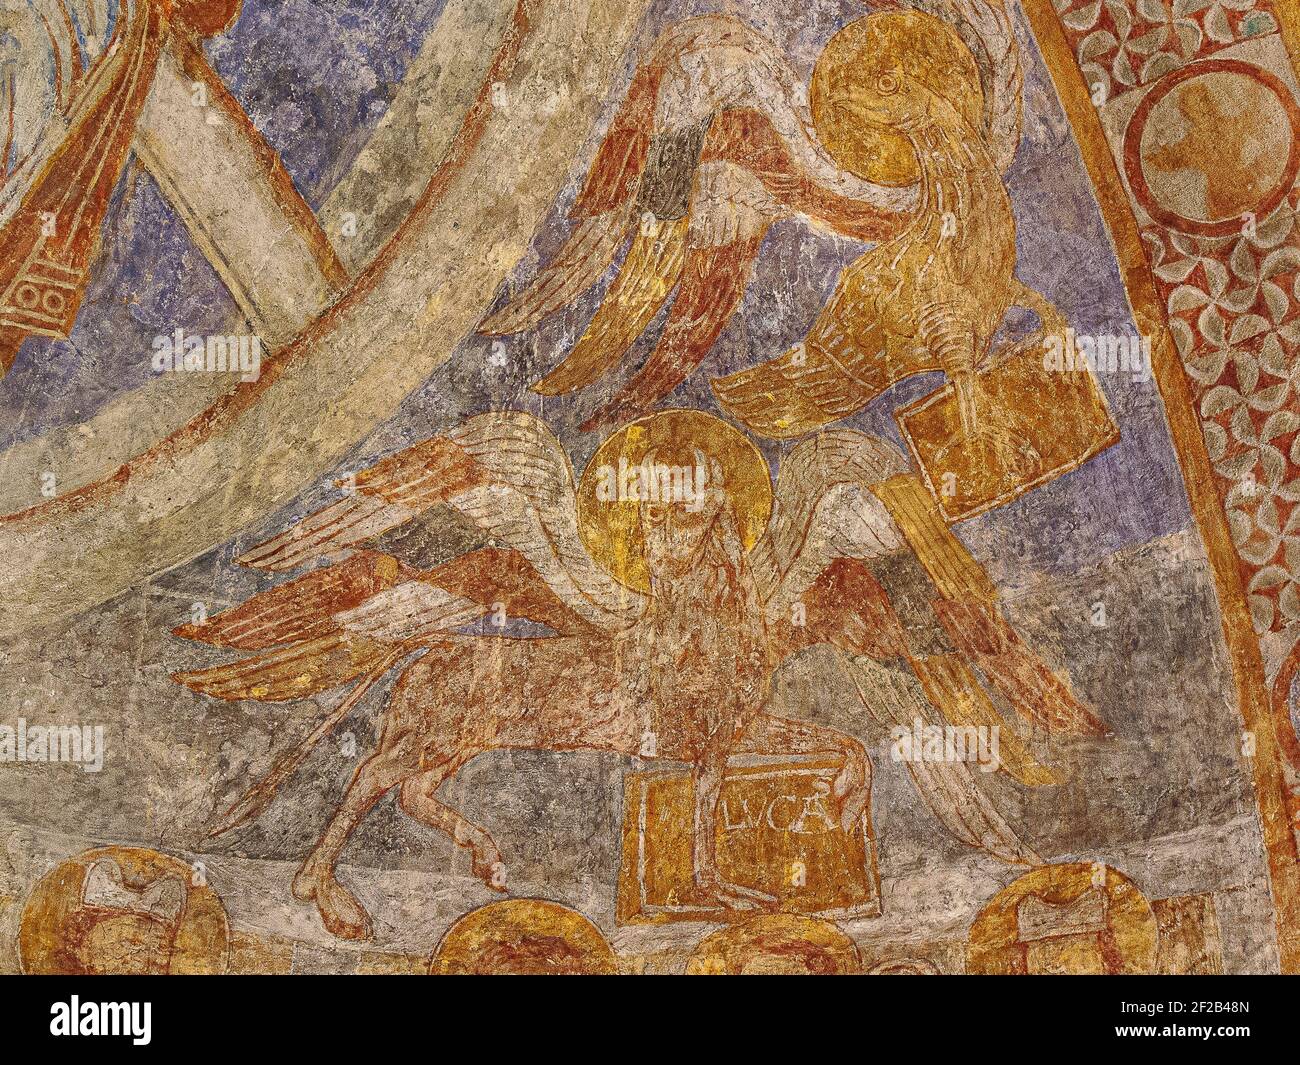 the eagle of St. John and the ox of St. Luke the Evangelist, an ancient romanesque painting in Övraby church, Sweden, November 6, 2009 Stock Photo